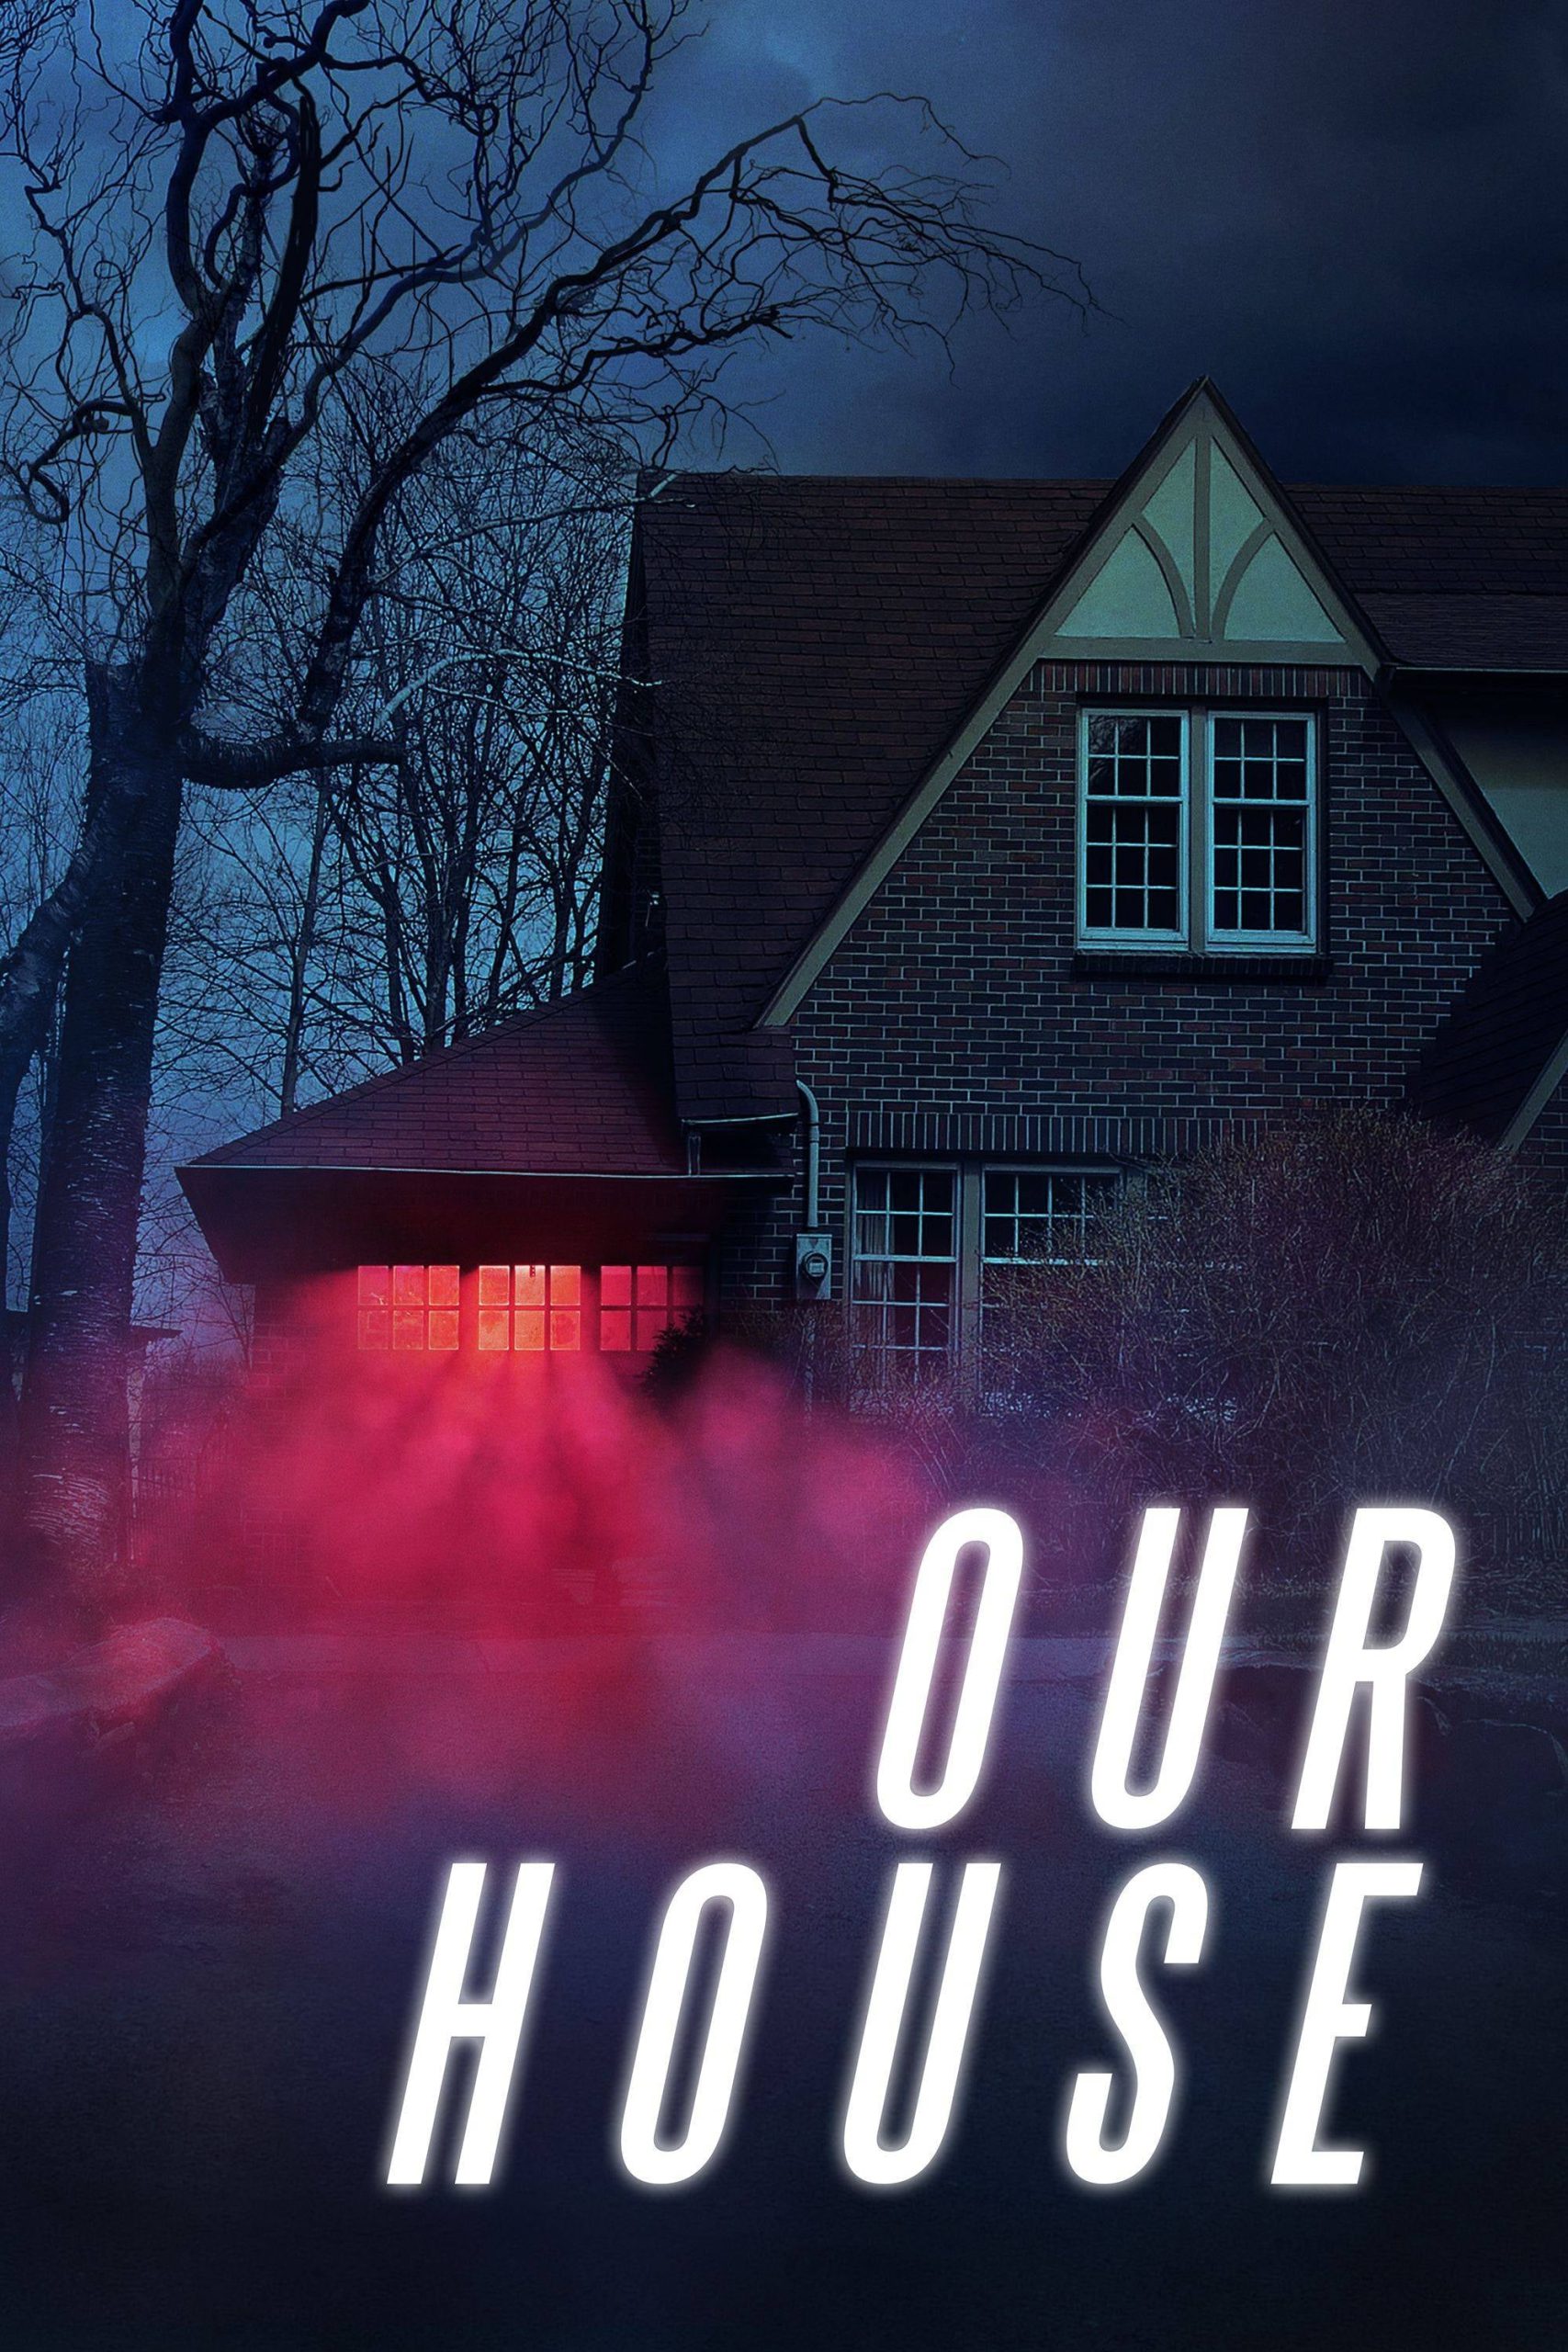 Our House [HD] (2018)